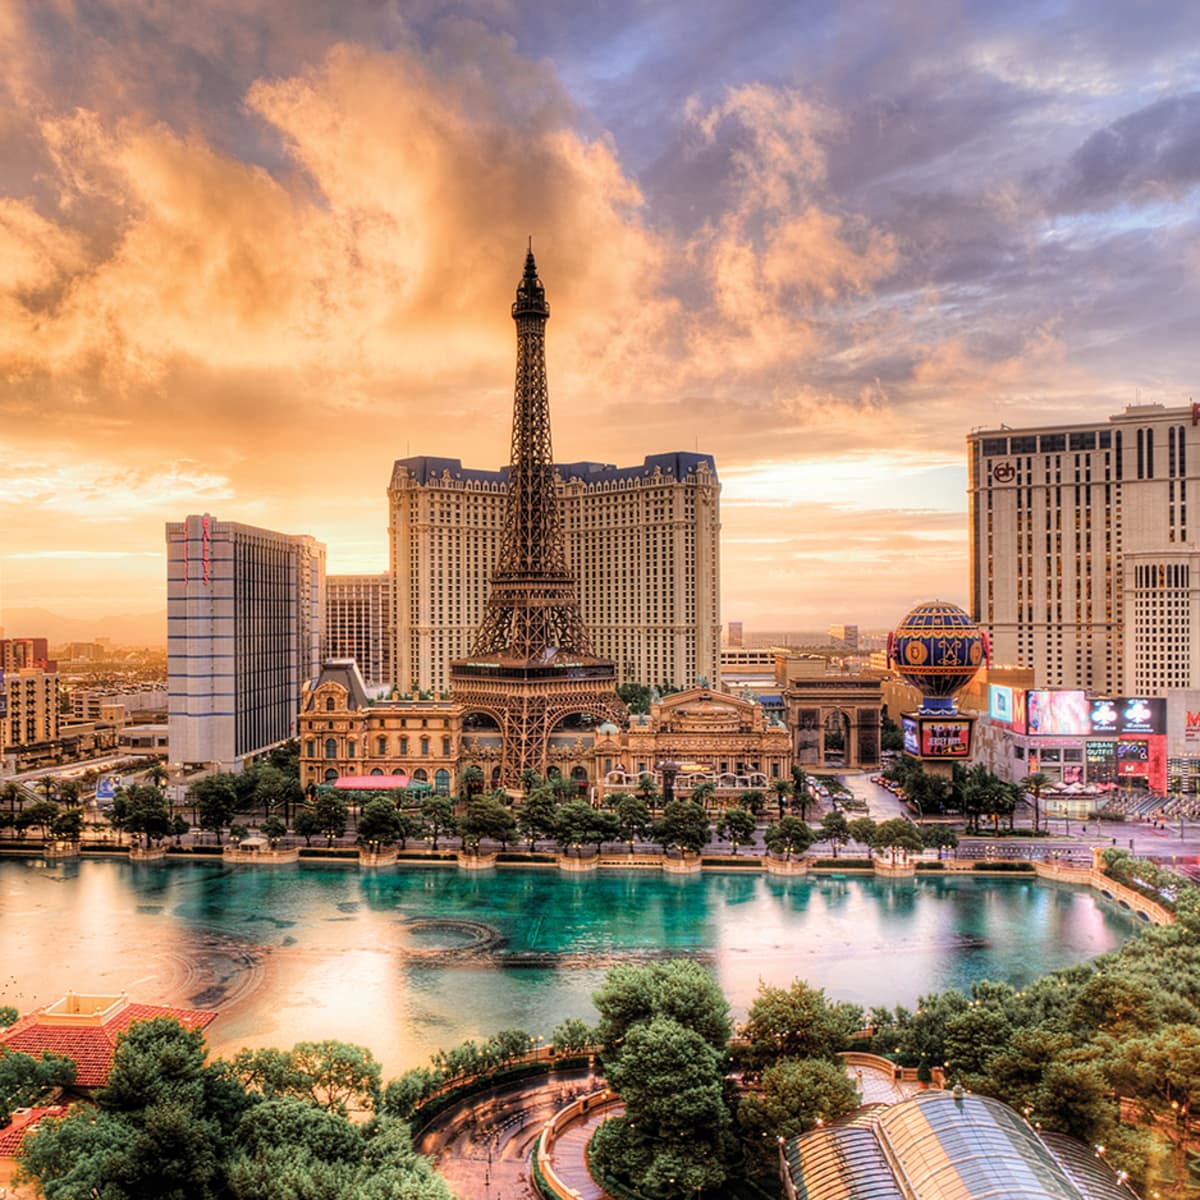 5 things to know about the vast Vegas hotel-casino that just opened